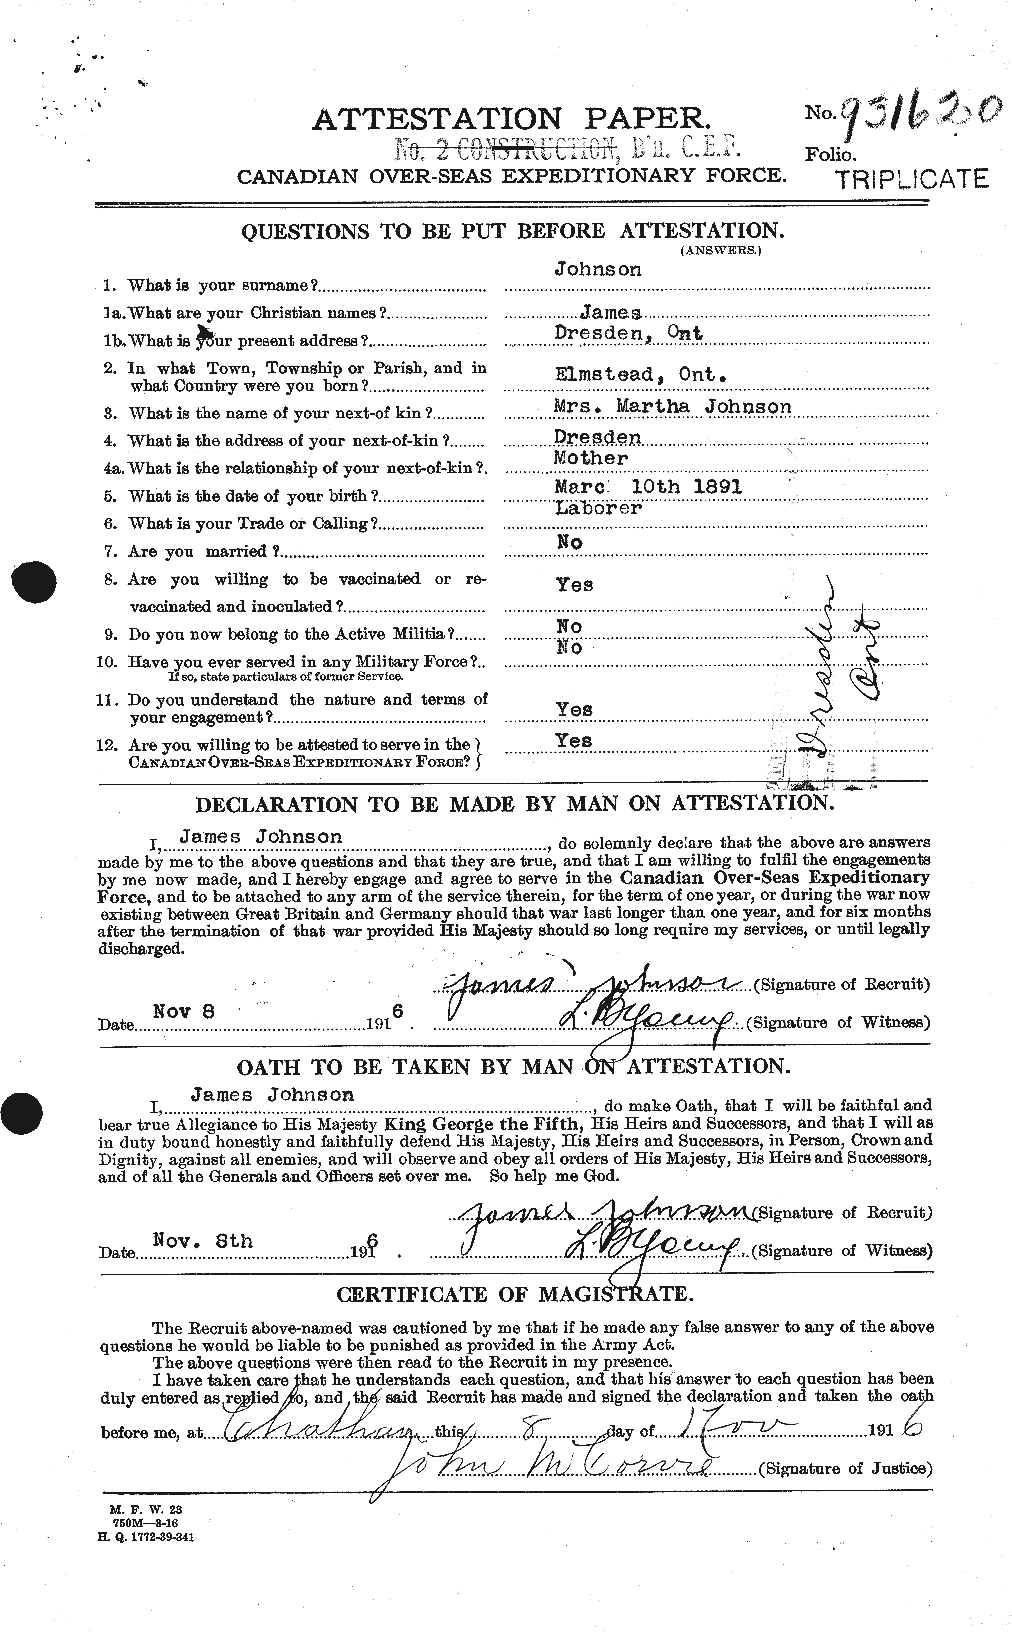 Personnel Records of the First World War - CEF 420616a